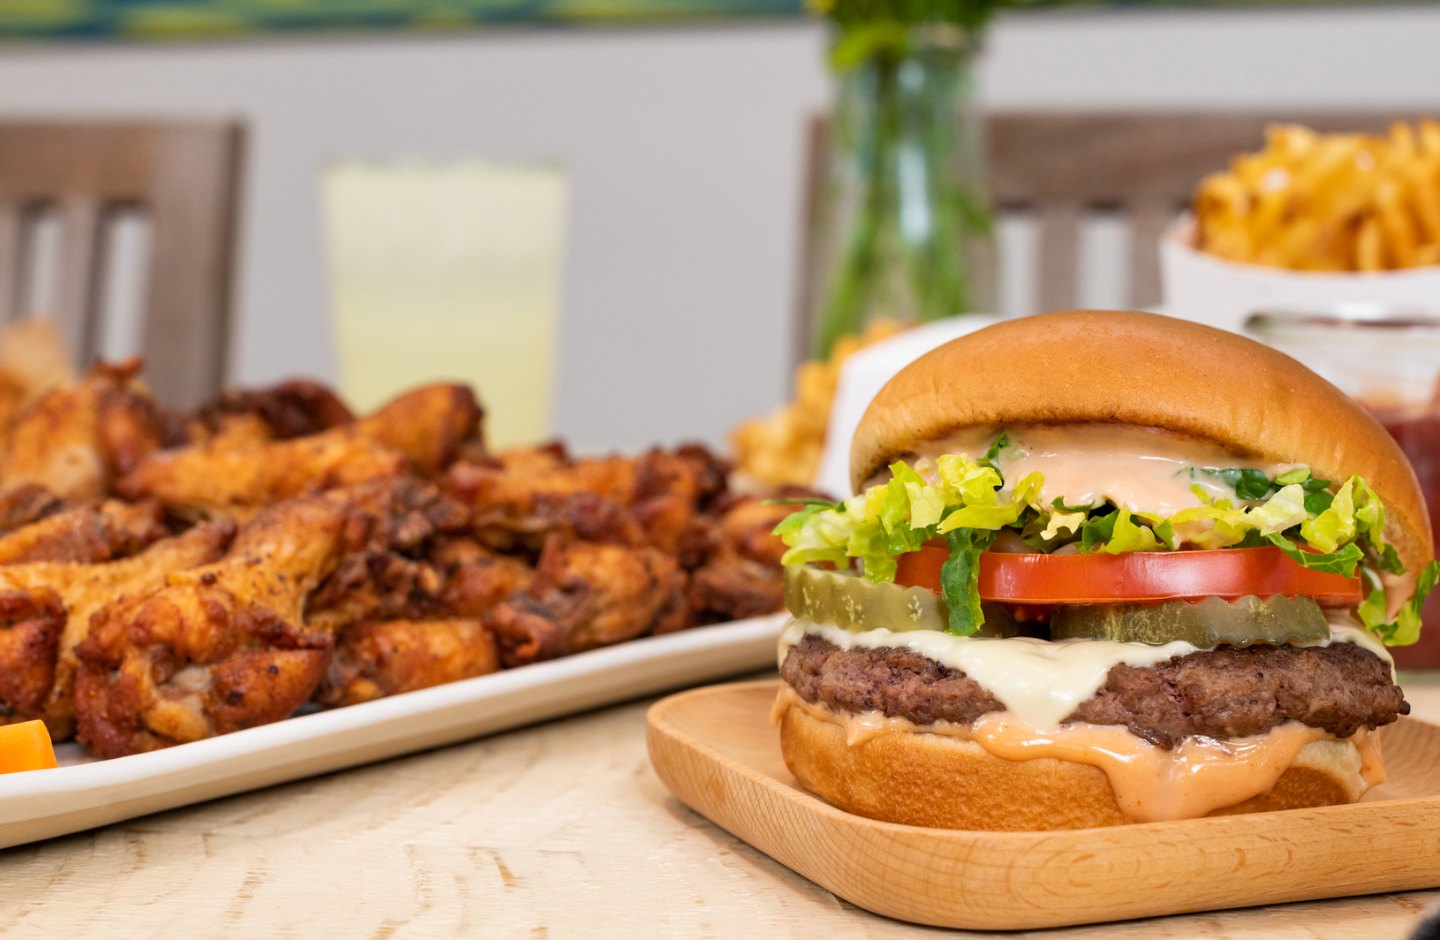 A burger topped with cheese, lettuce, tomato and burger sauce next to a plate of chicken wings and fries from Little Blue Menu.